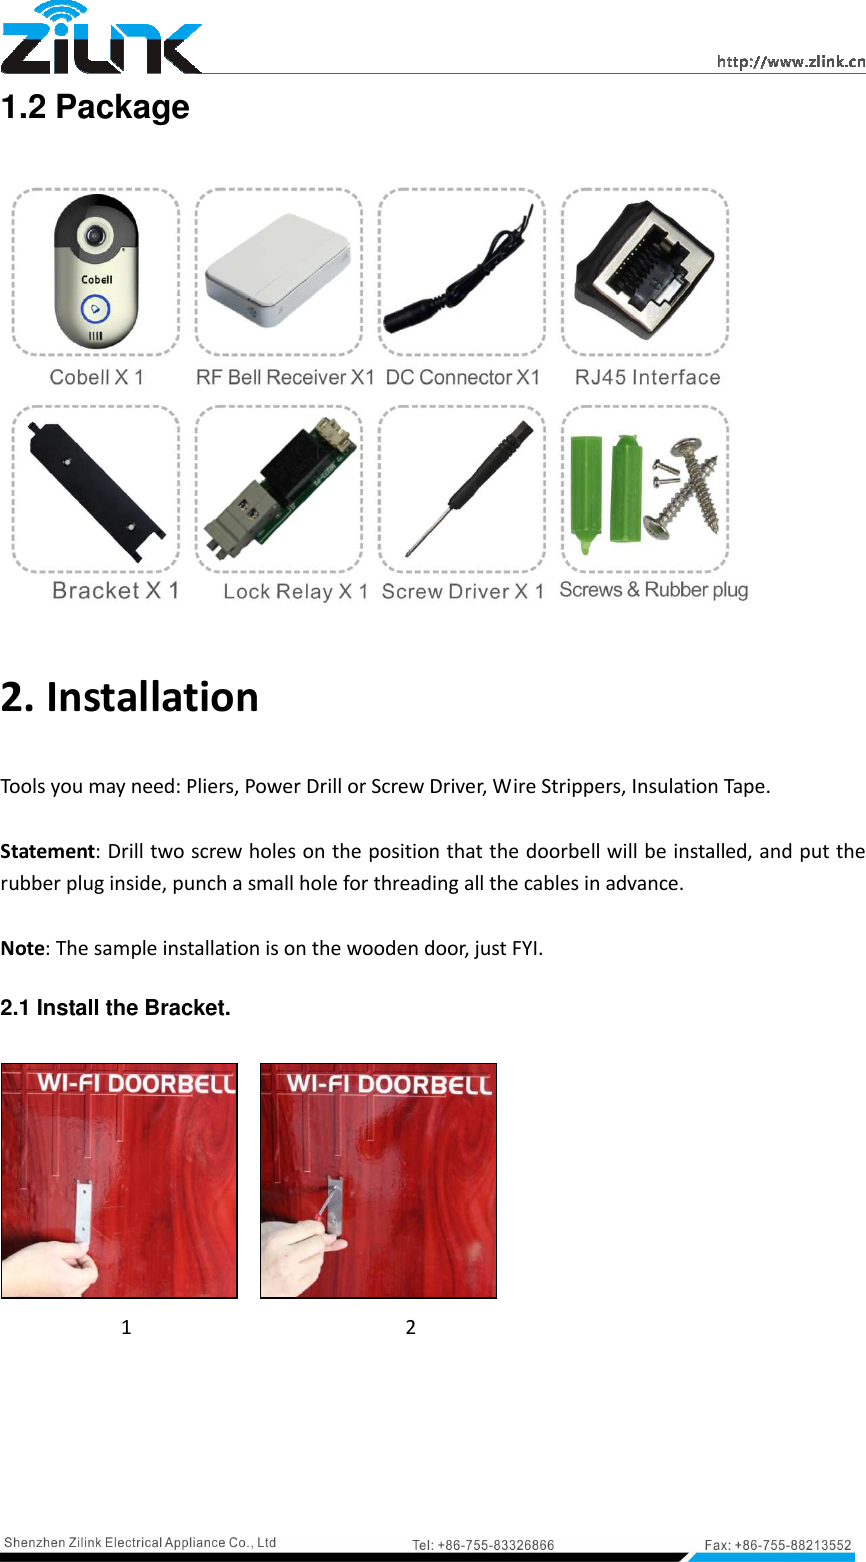   1.2 Package  2. Installation Tools you may need: Pliers, Power Drill or Screw Driver, Wire Strippers, Insulation Tape.  Statement: Drill two screw holes on the position that the doorbell will be installed, and put the rubber plug inside, punch a small hole for threading all the cables in advance.  Note: The sample installation is on the wooden door, just FYI. 2.1 Install the Bracket.                 1                         2 